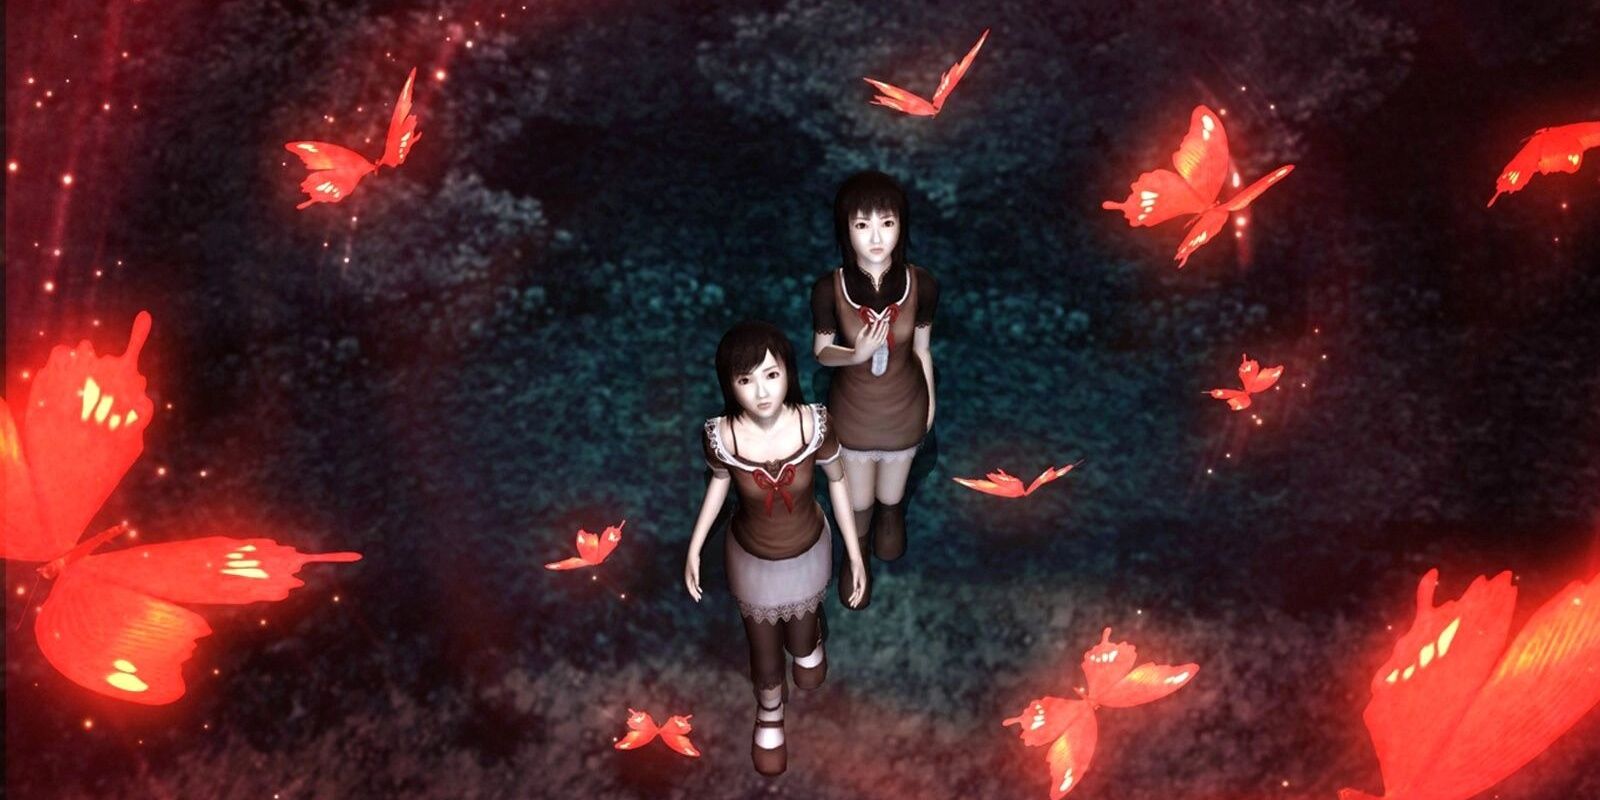 Main characters Mayu and Mio look up towards the swarm if crimson butterflies flying towards the camera.